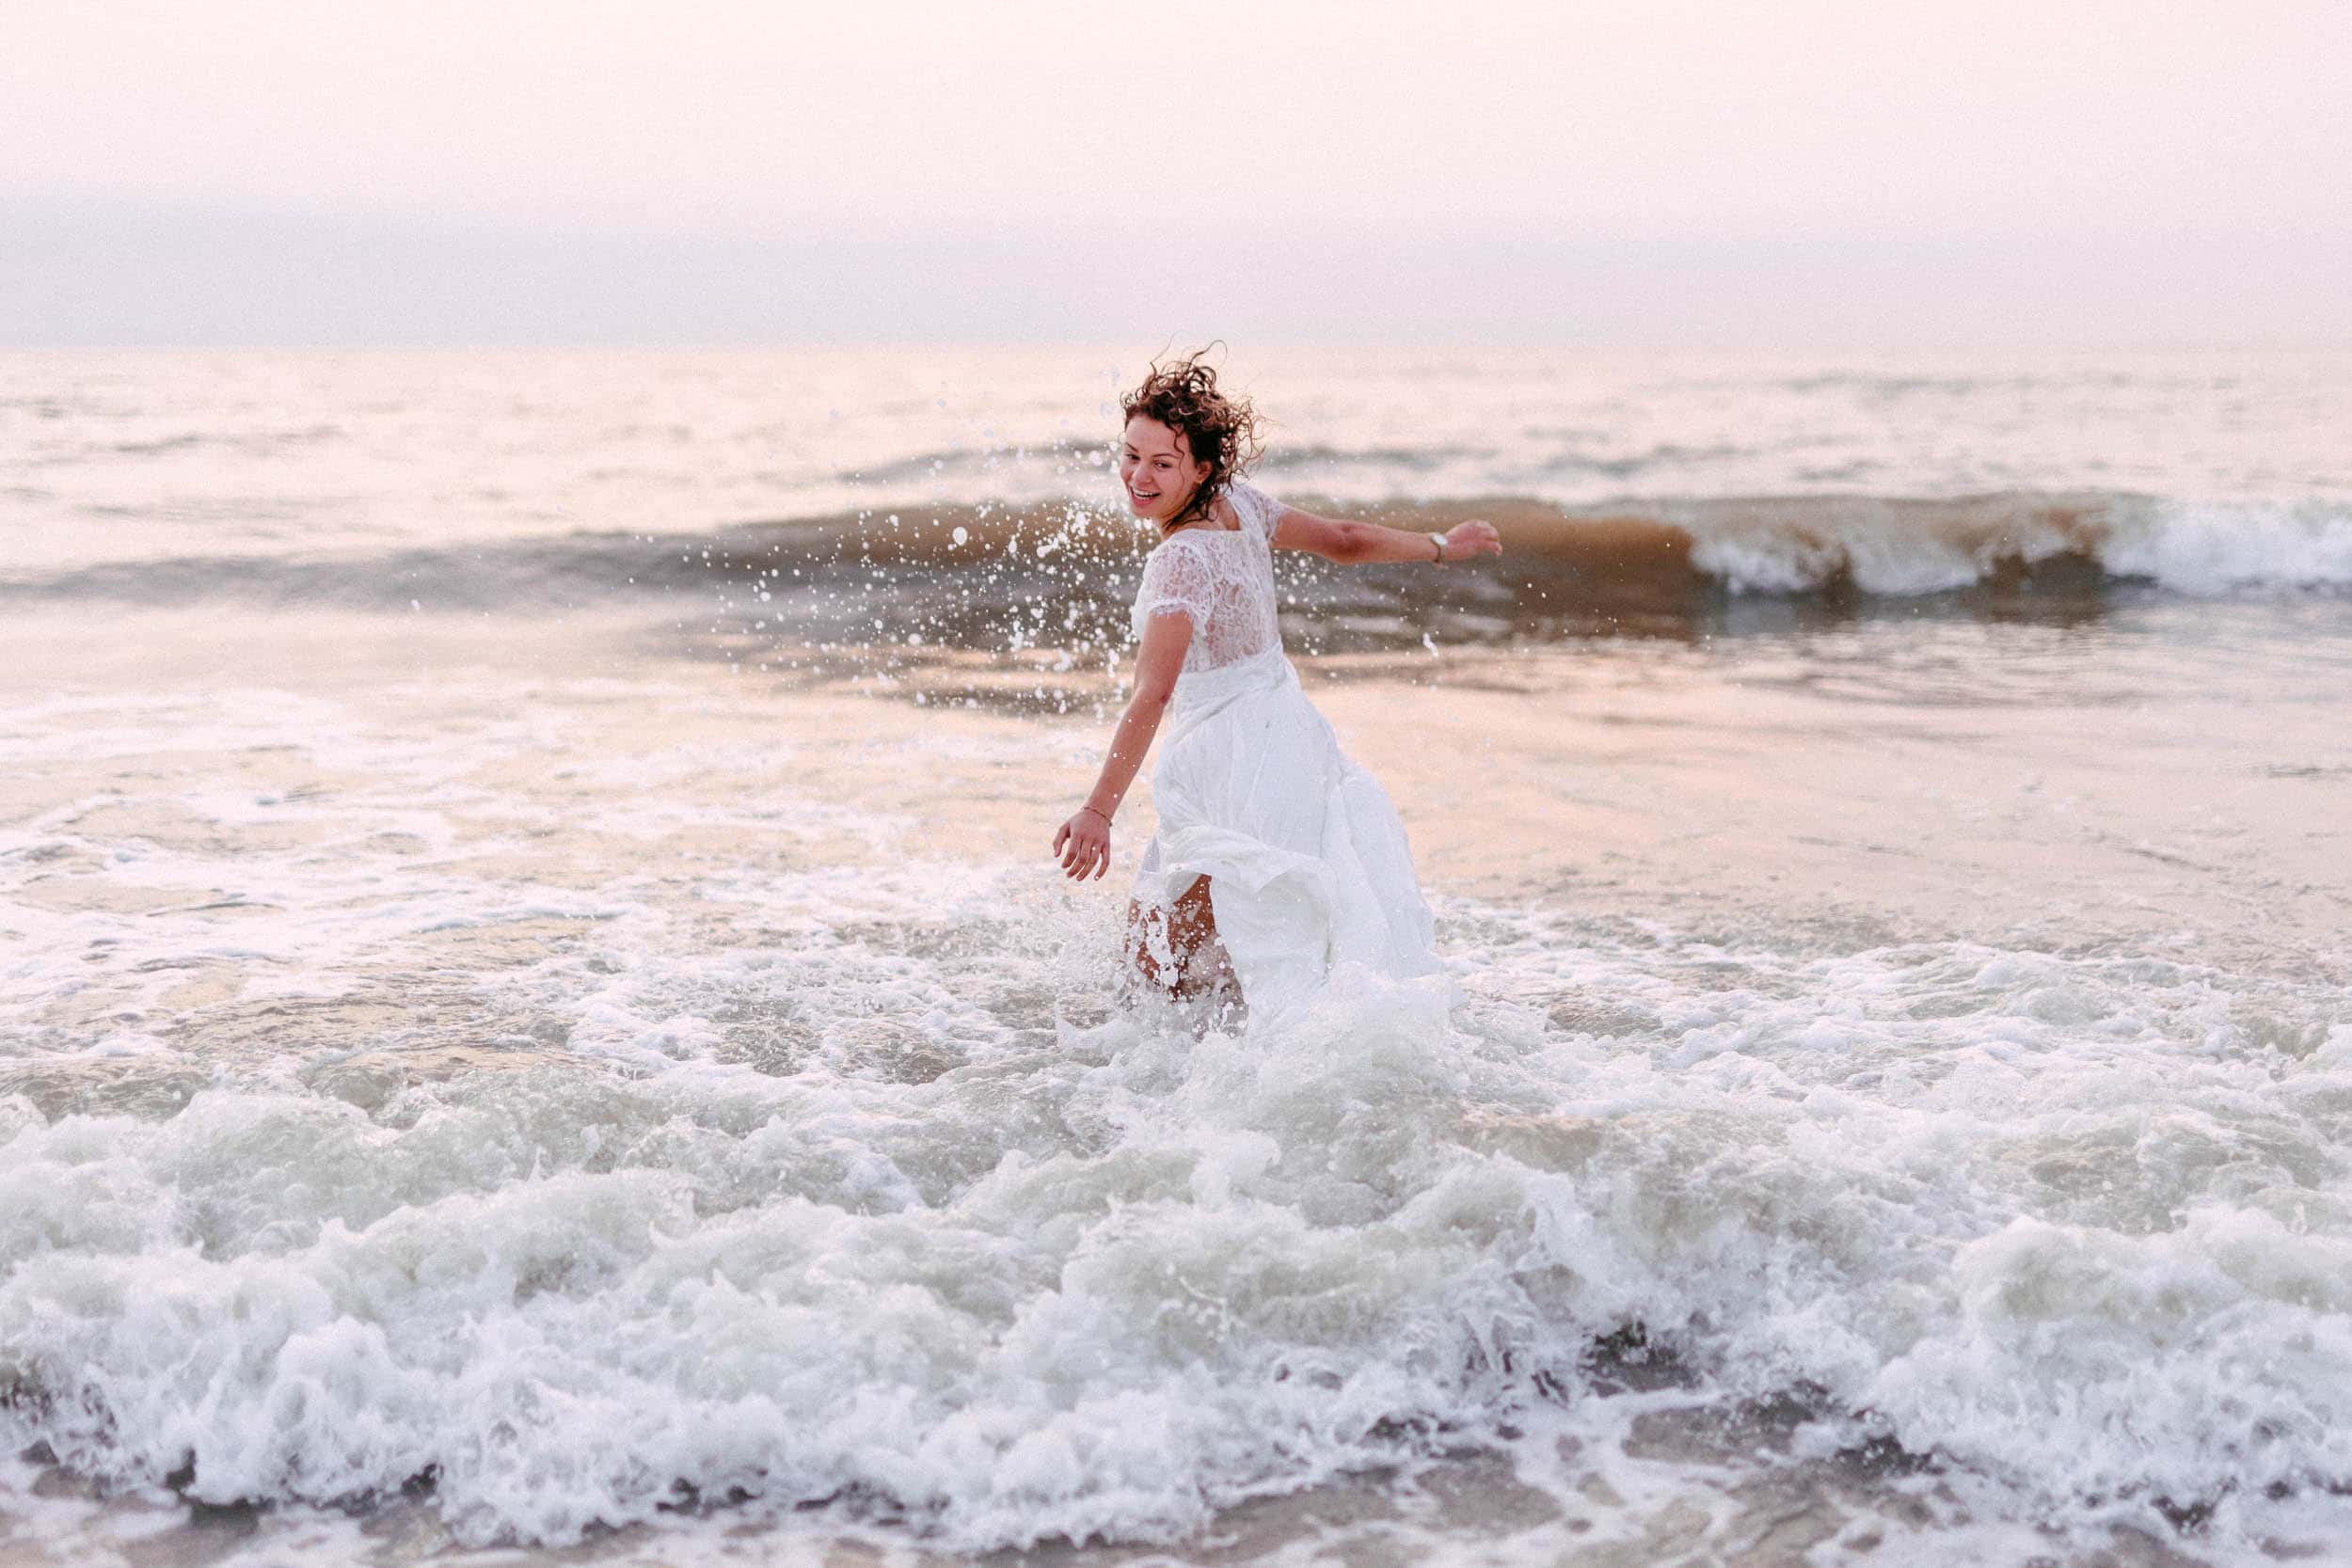 A woman in a white dress embracing the concept of "Trash The Dress" by fearlessly immersing herself in the ocean.